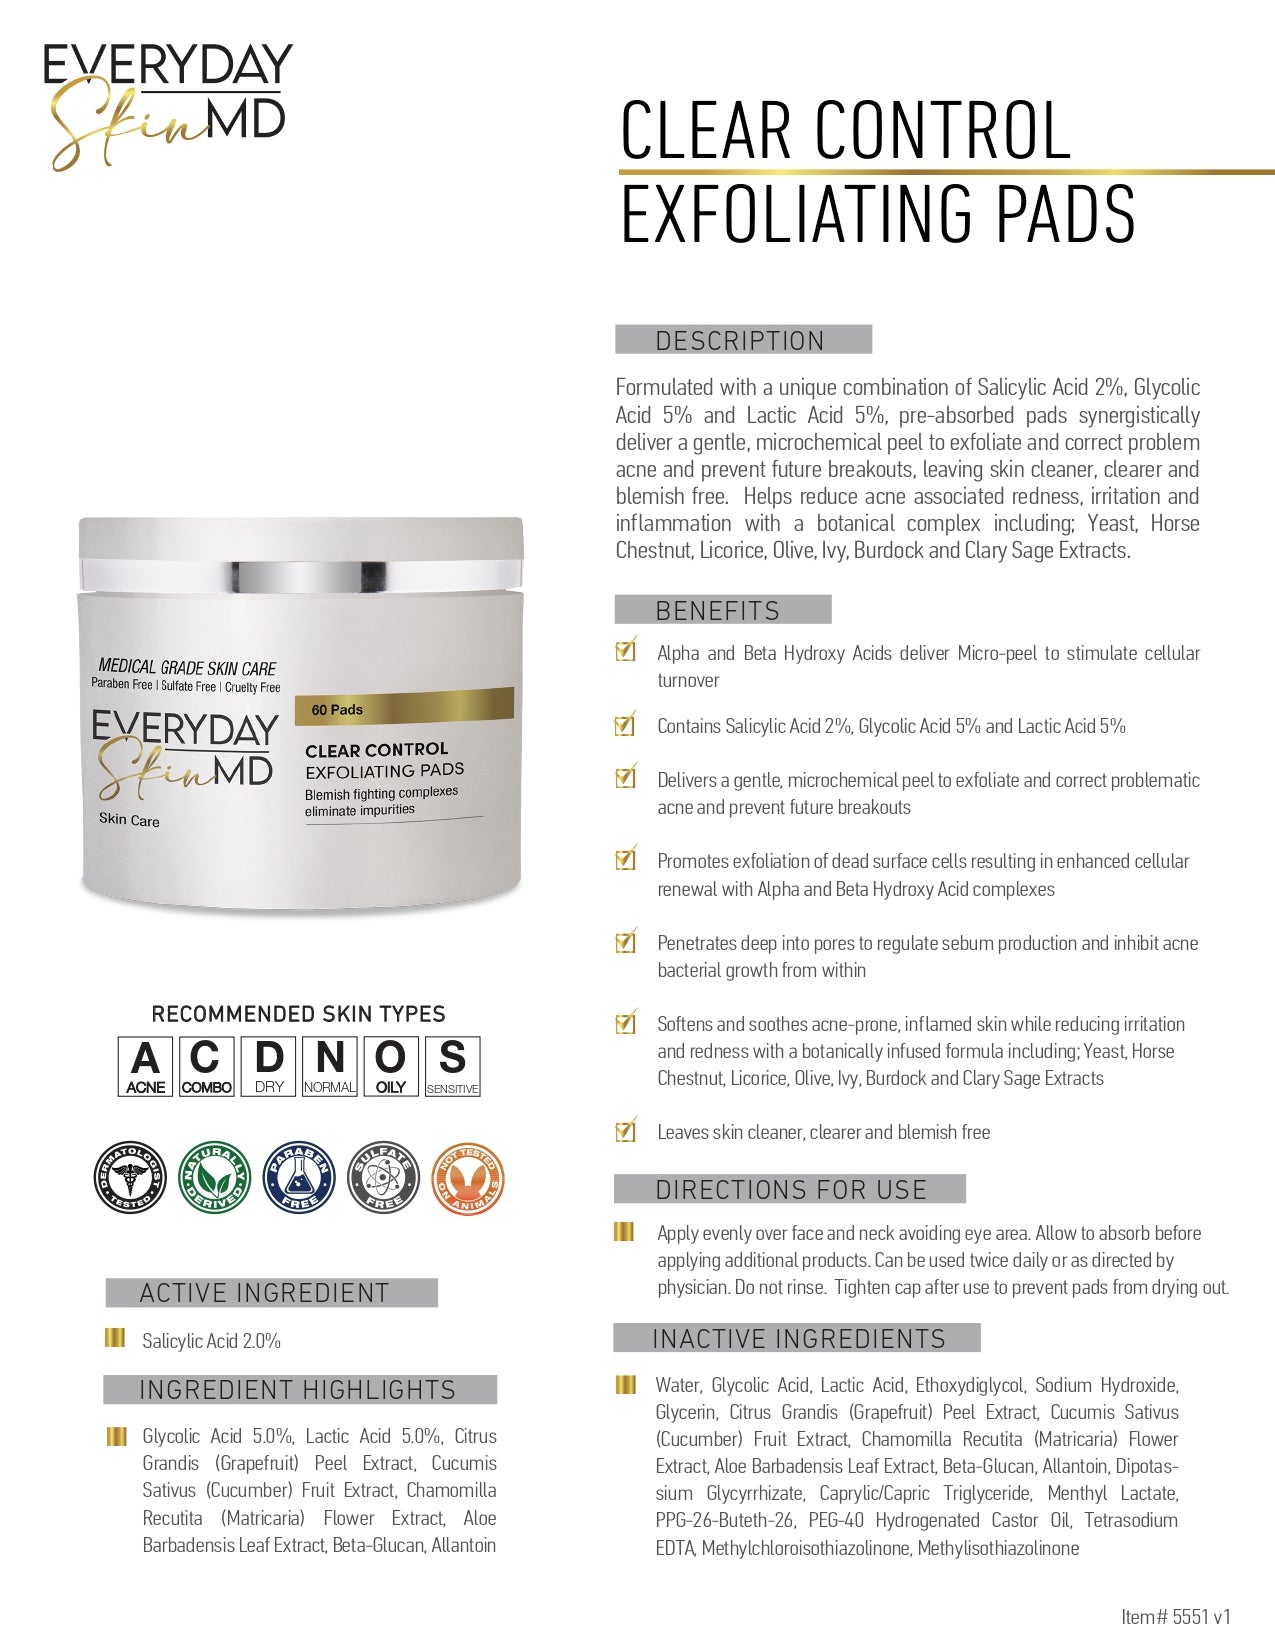 Clear Control Exfoliating Pads